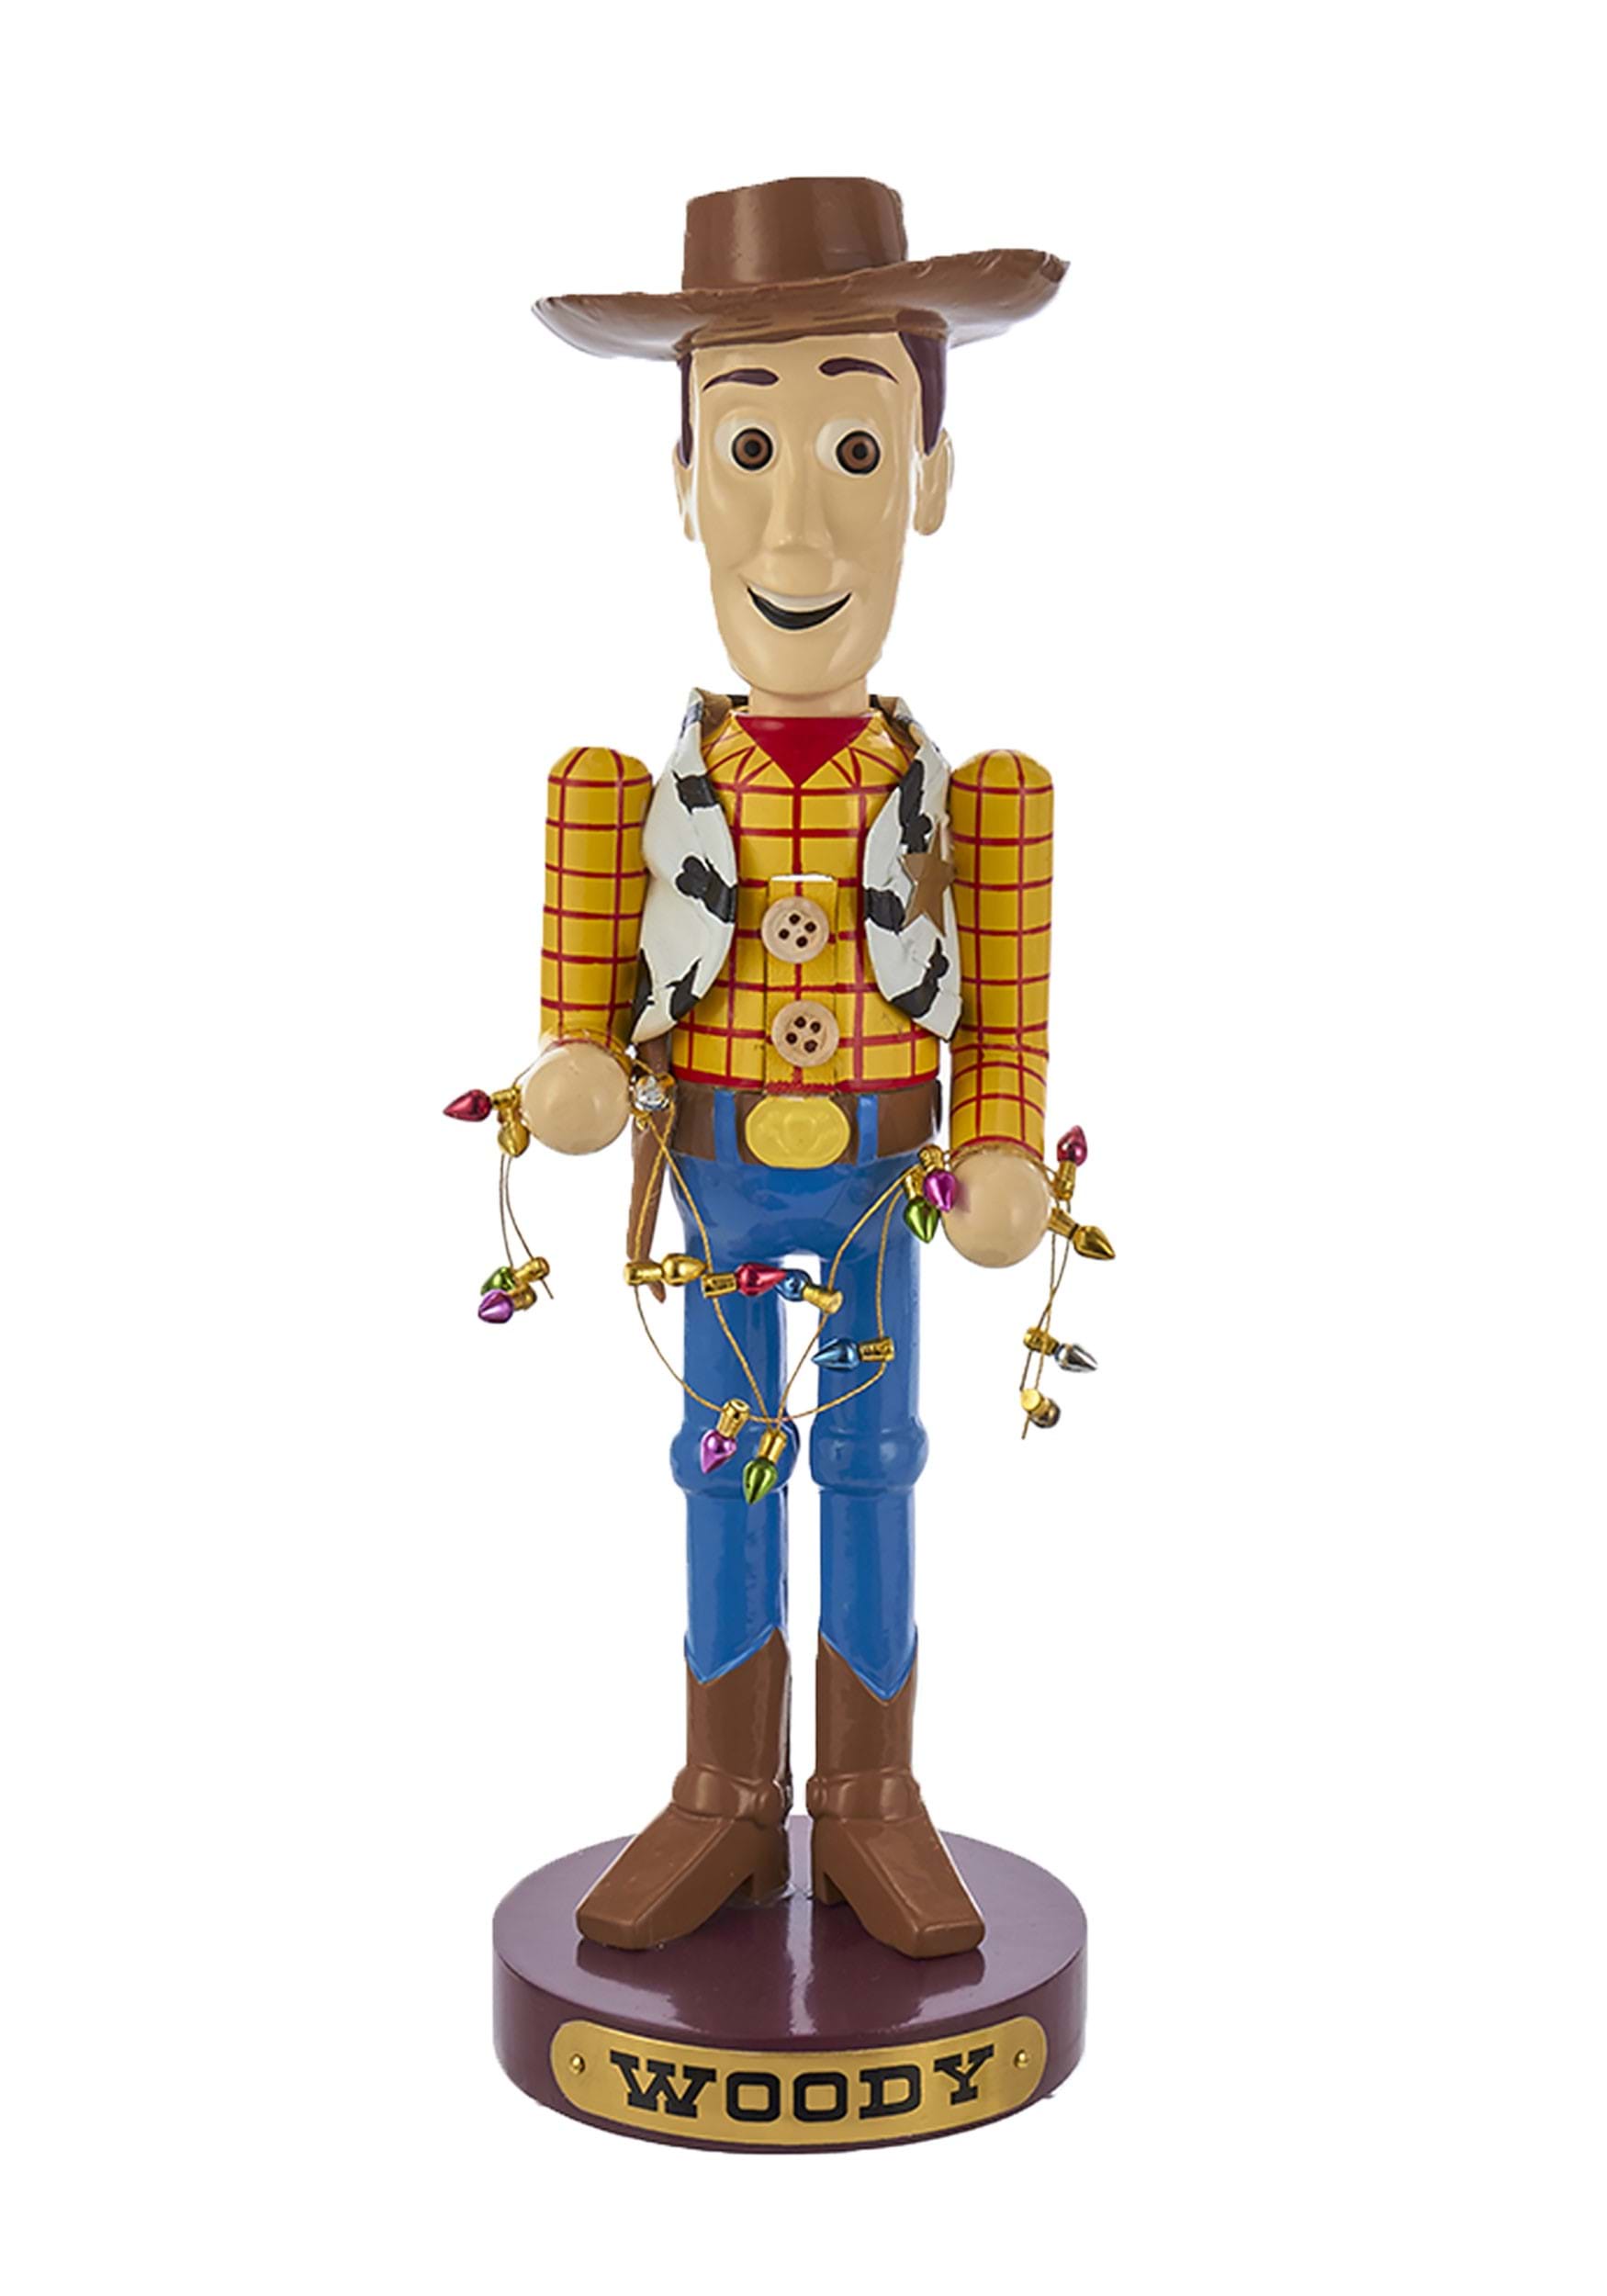 11" Woody Nutcracker from Toy Story